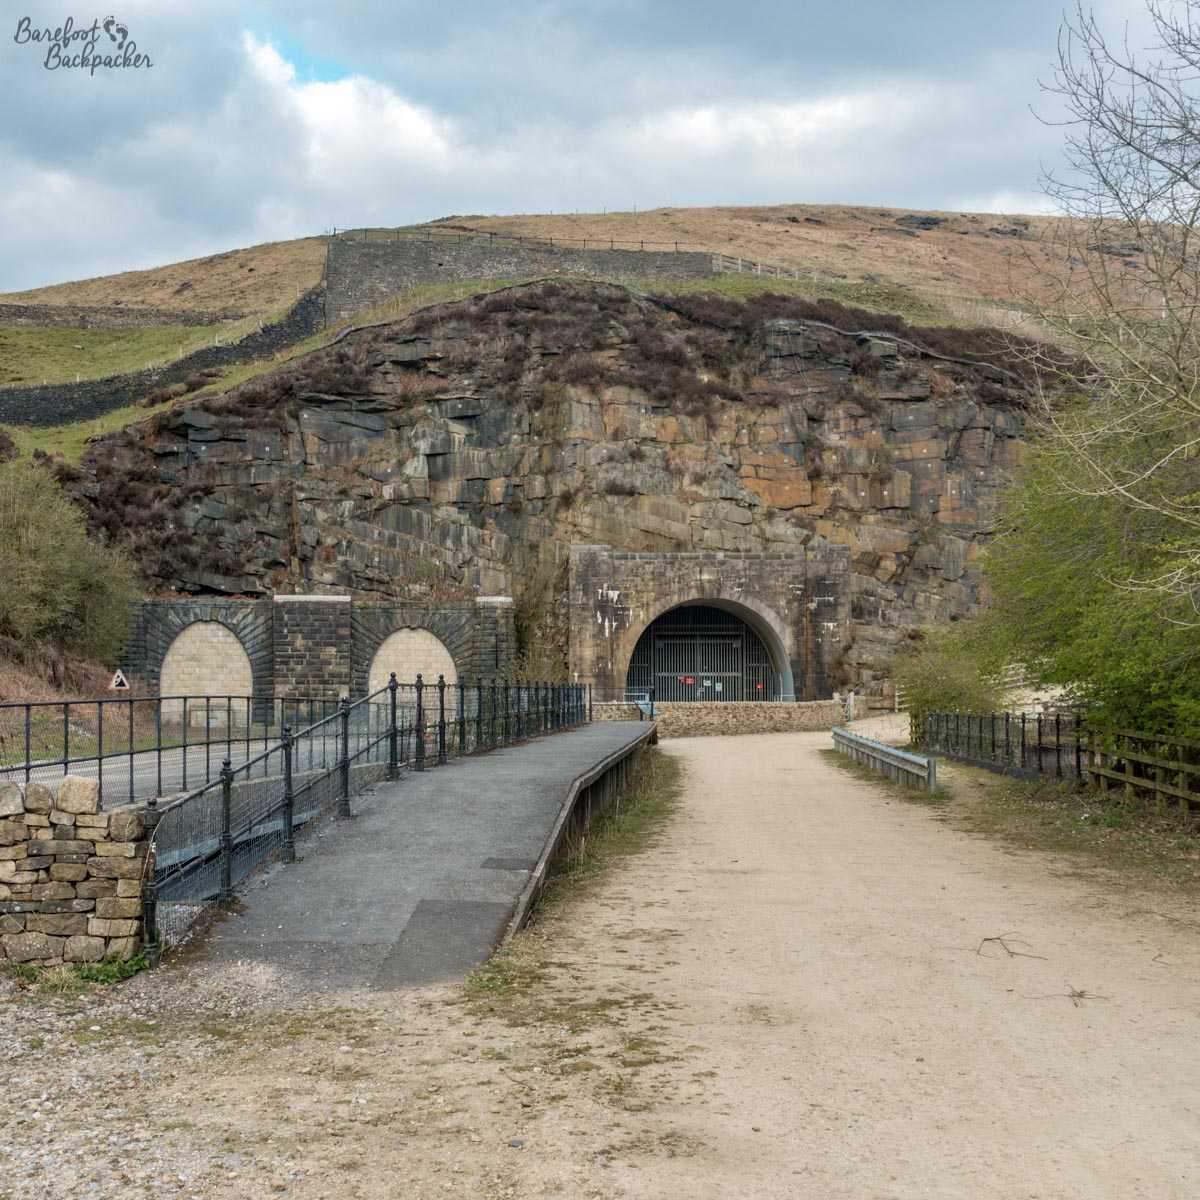 Woodhead Railway Station, what remains of it, with the Woodhead tunnel portals in the background.